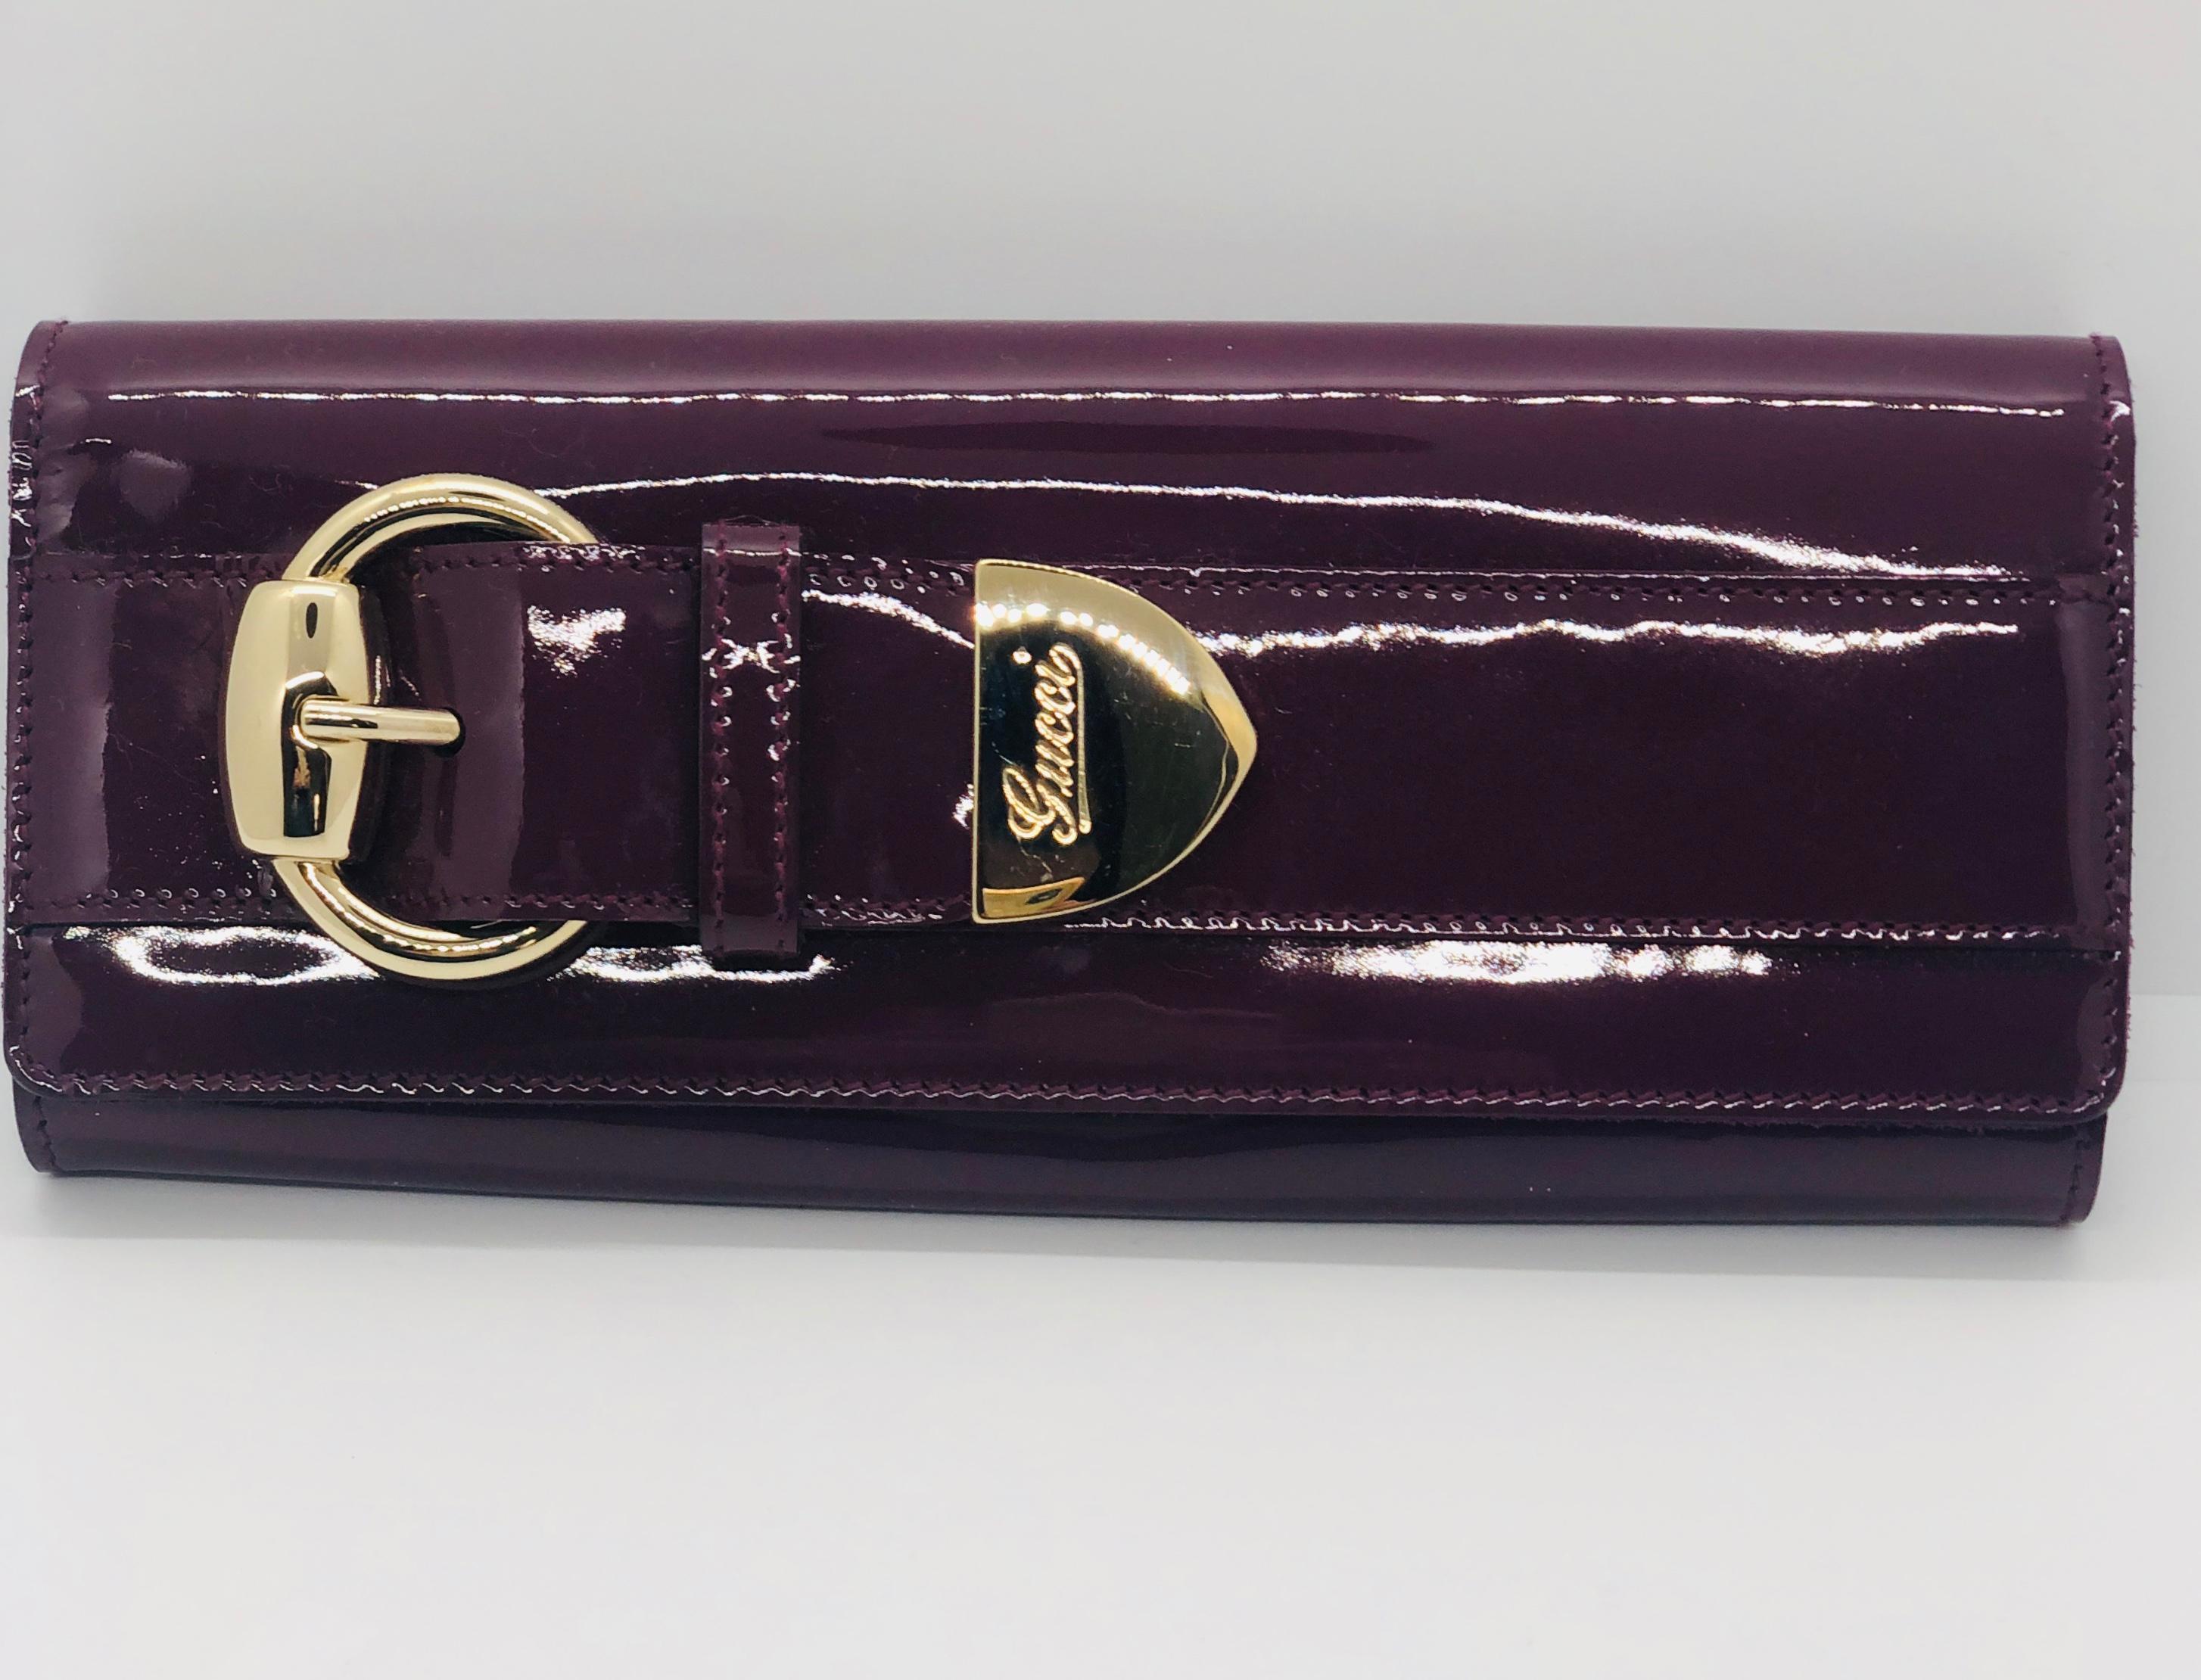 Offered is a Gucci pink / purple patent leather mini clutch with gold metal insignia hardware.

Make:  Gucci
Place of manufacture:  Italy
Color:  Berry- pink / purple
Style:  Mini patent leather clutch with gold metal hardware / Retro print silk